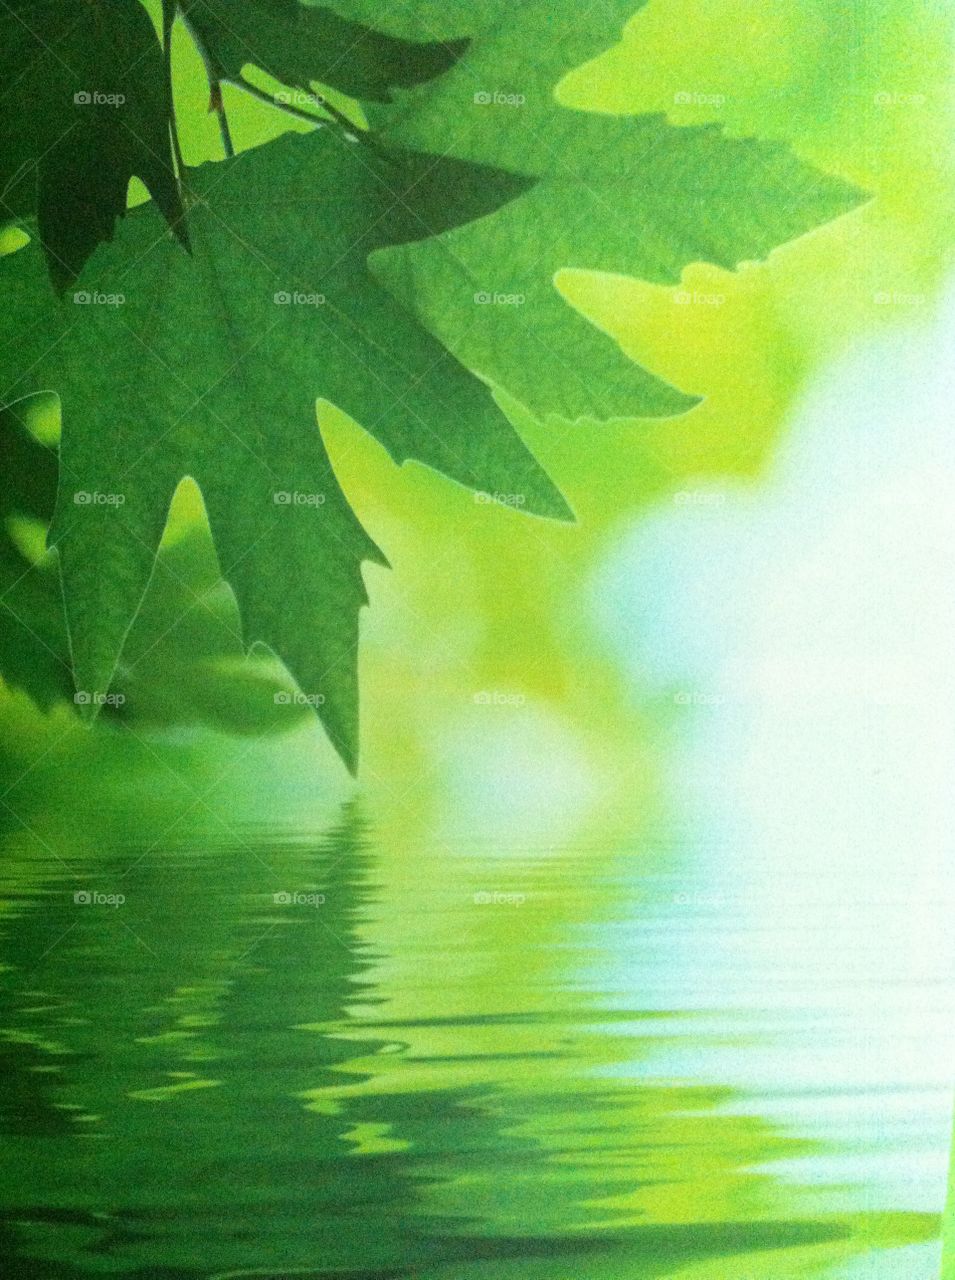 Green leaf above water. A green leaf resting above a body of water.